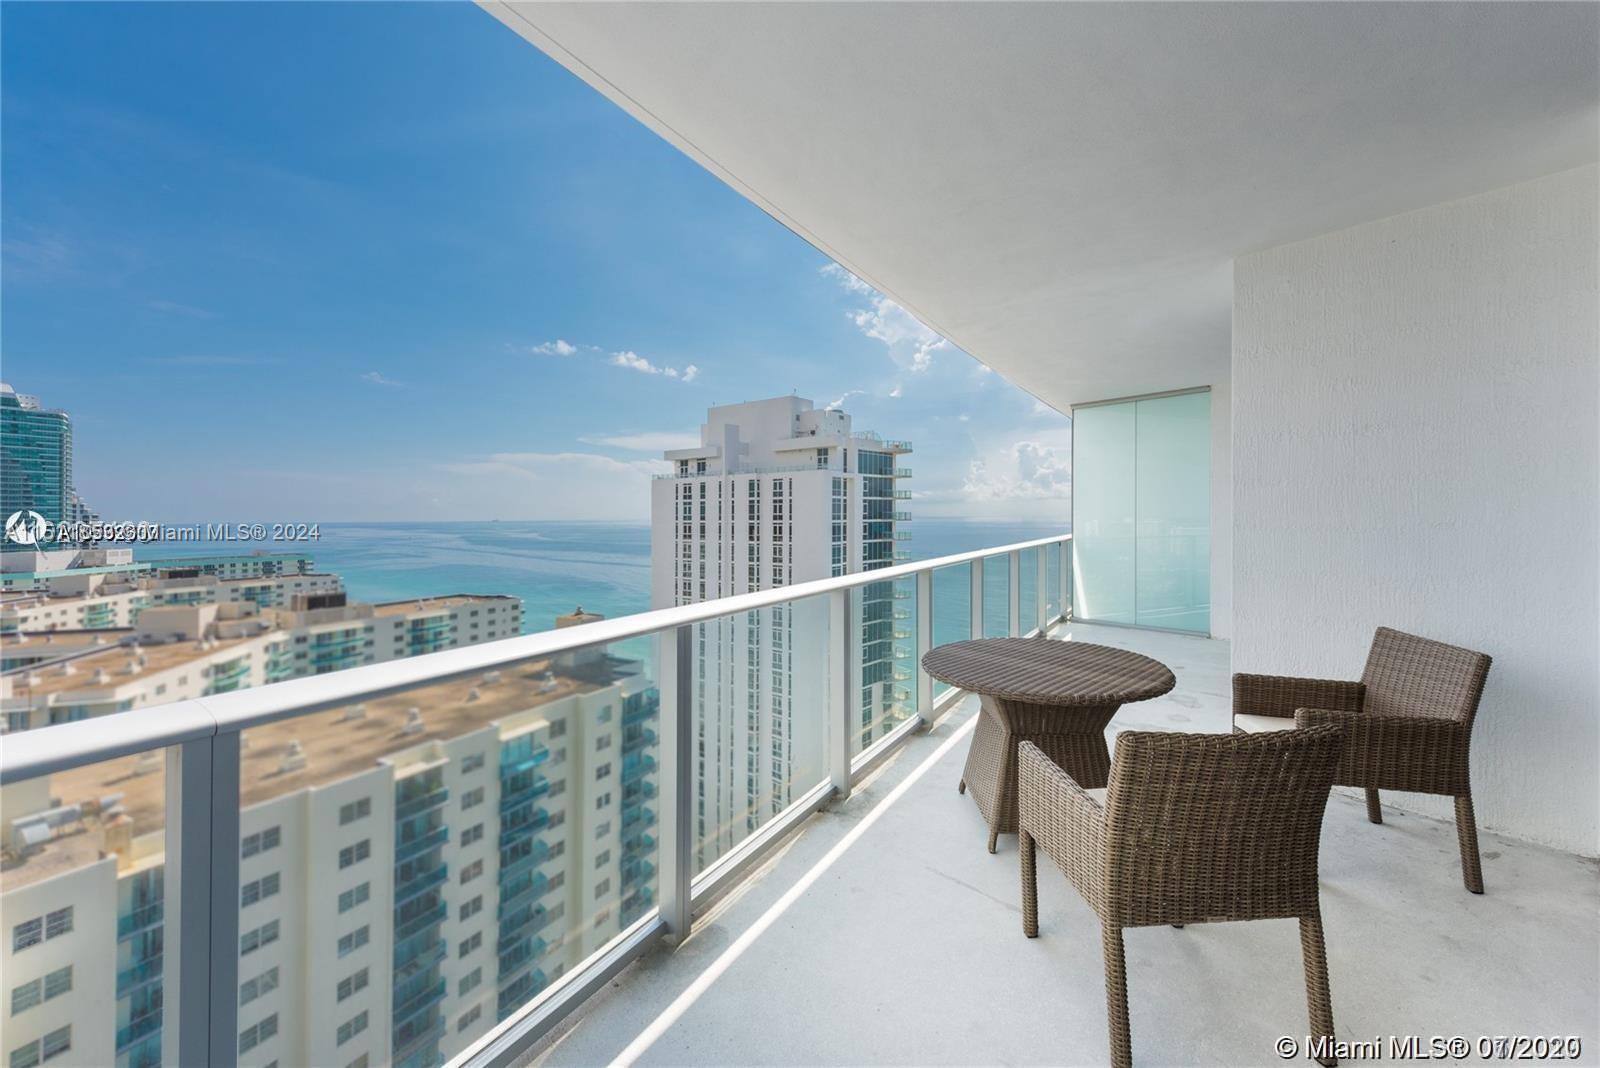 Photo of 4111 S Ocean Dr #2108 in Hollywood, FL